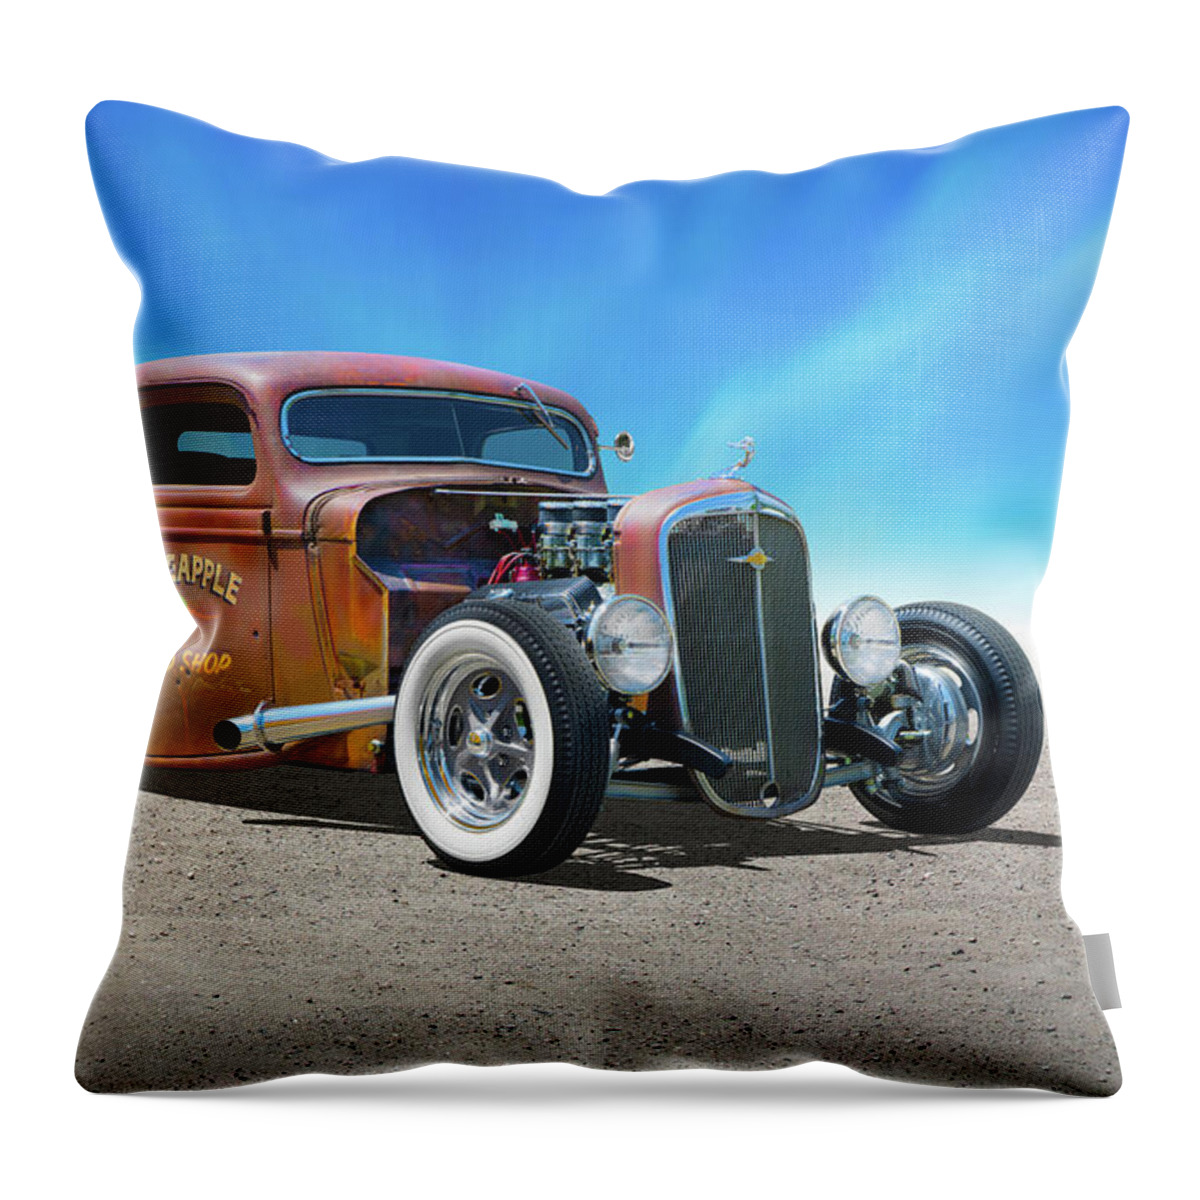 Transportation Throw Pillow featuring the photograph Rat Truck by Mike McGlothlen